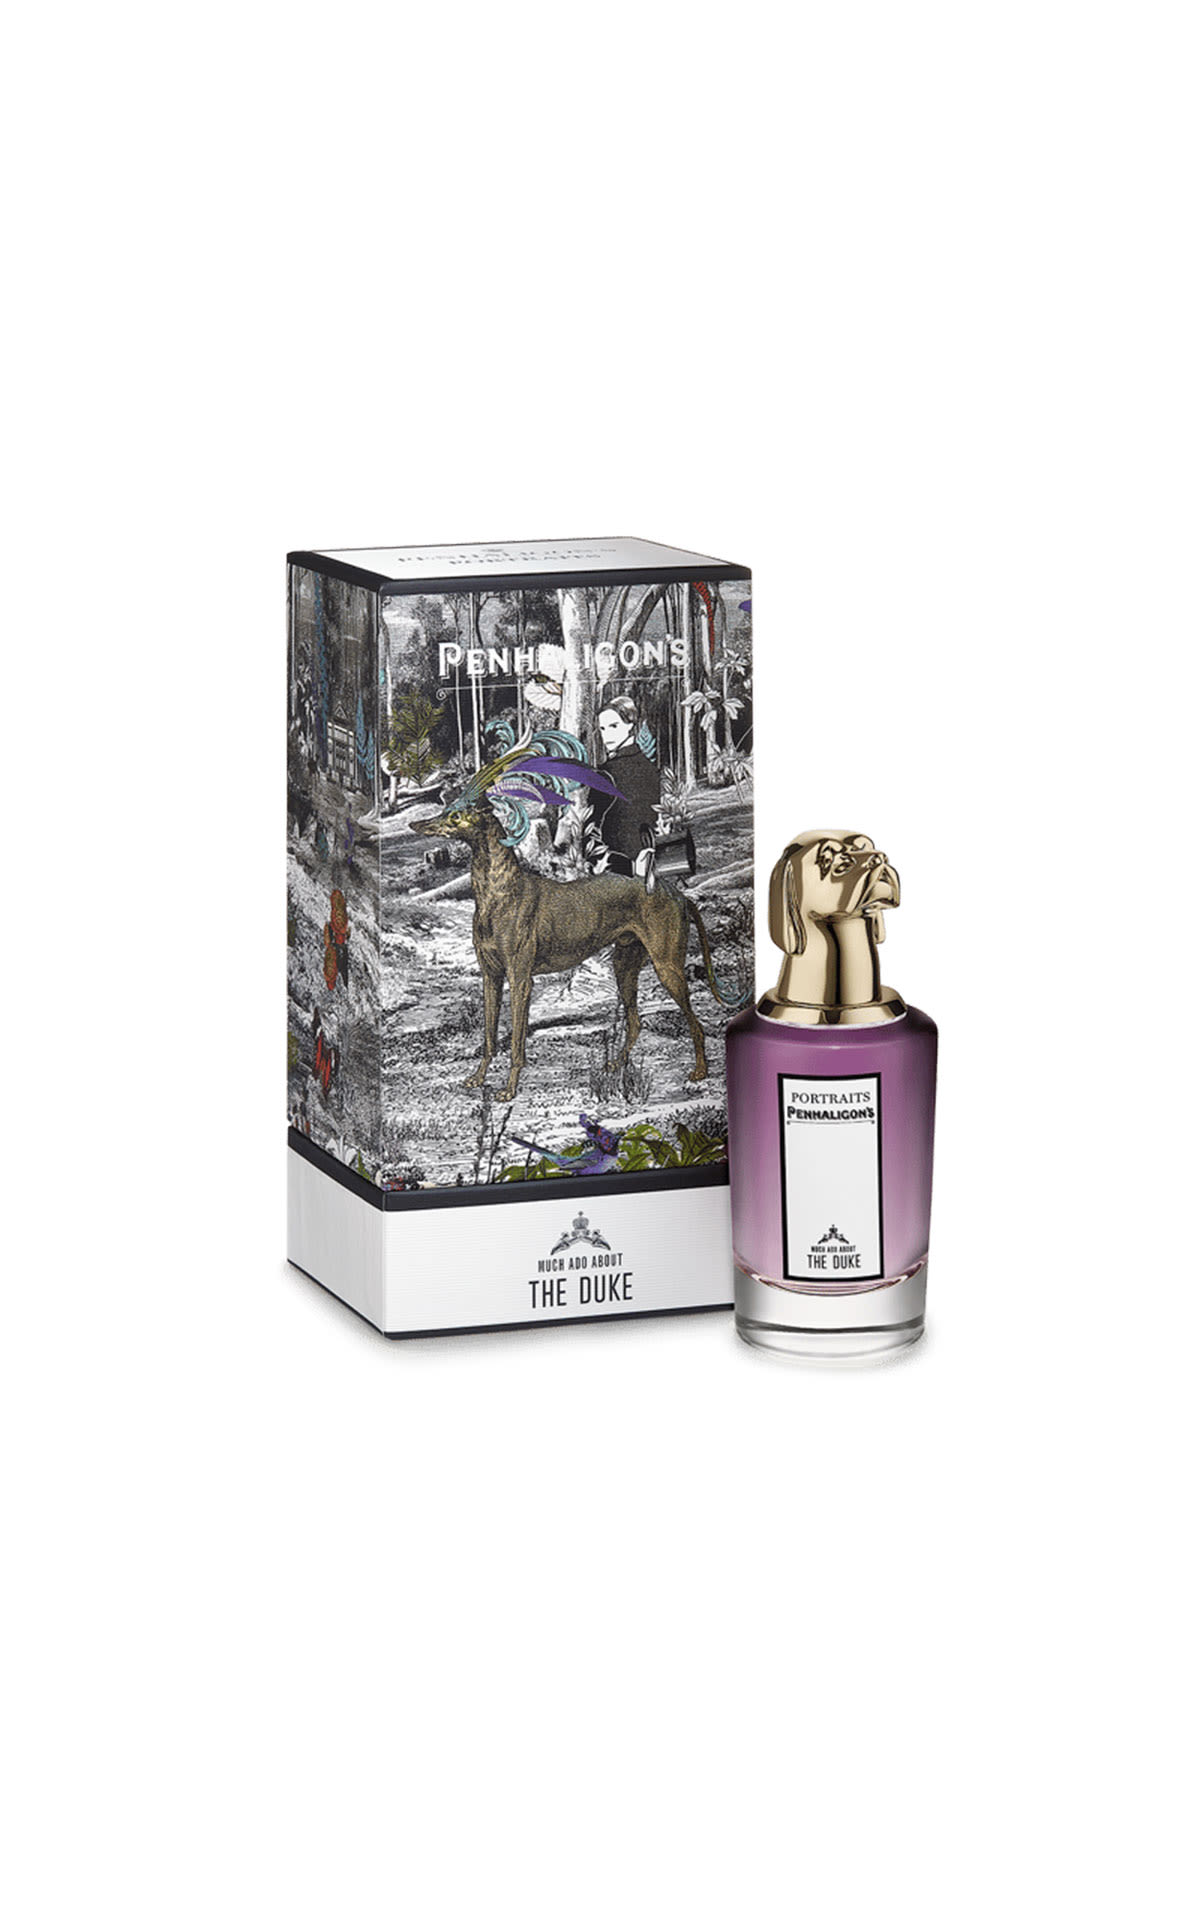 Penhaligon's Much ado about the duke from Bicester Village